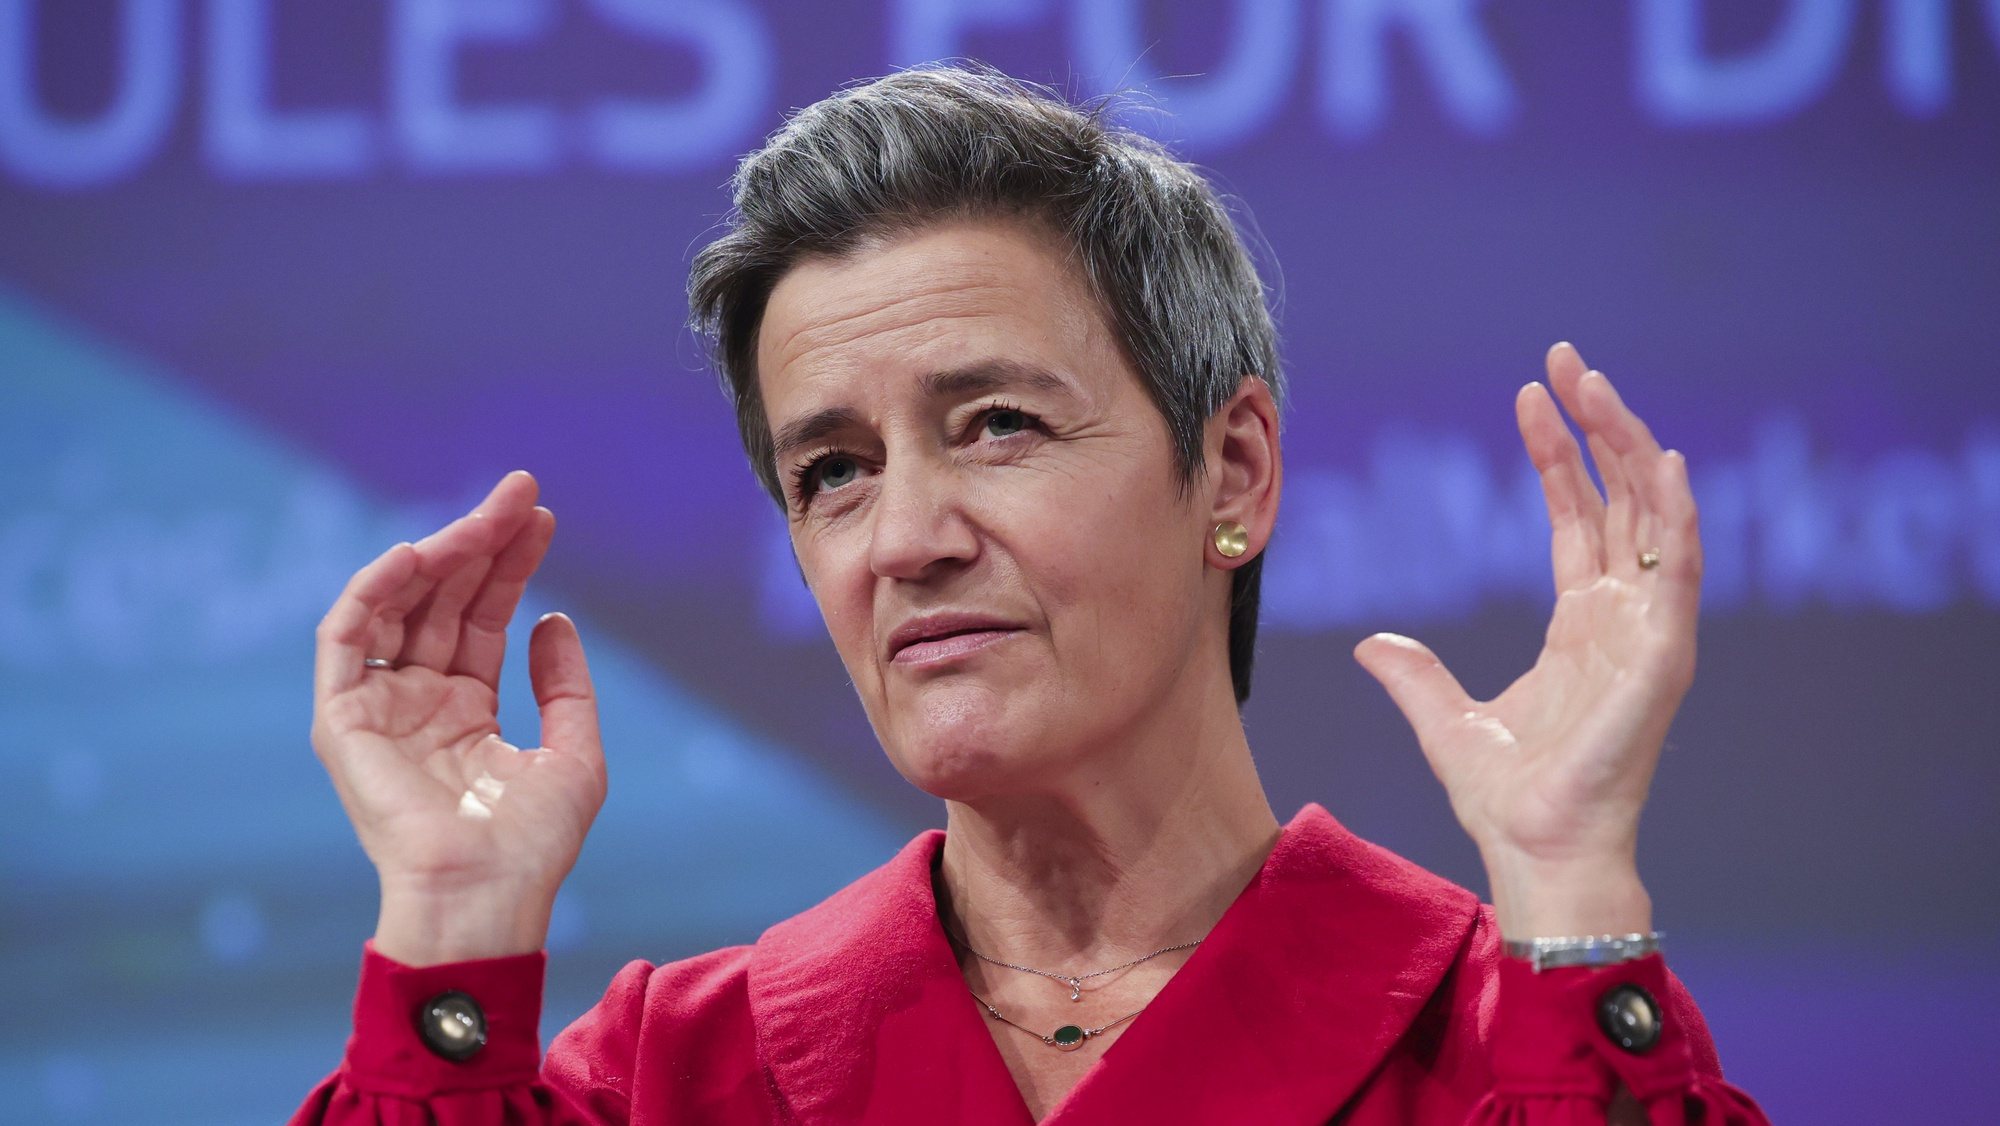 epa08885505 European Commissioner for Europe fit for the Digital Age Margrethe Vestager during a news conference on the Digital Services Act and the Digital Markets Act at the European Commission headquarters in Brussels, 15 December 2020.  EPA/Olivier Matthys / POOL